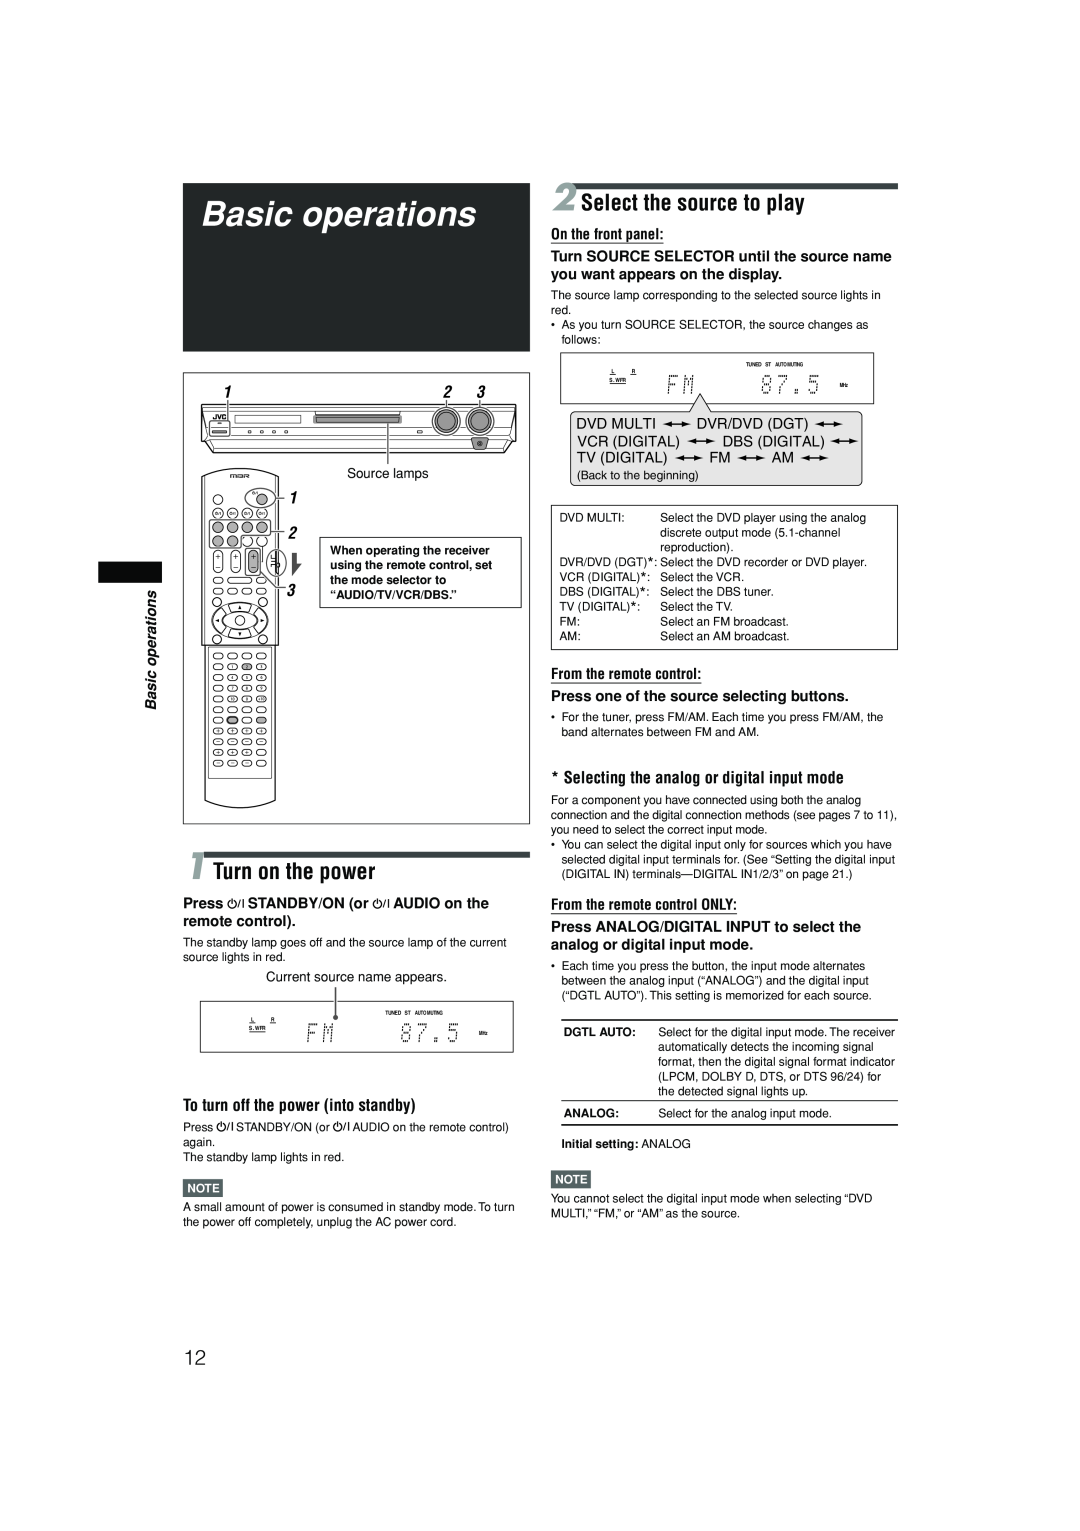 JVC RX-F10S manual Basic operations, Turn on the power, Select the source to play, To turn off the power into standby 